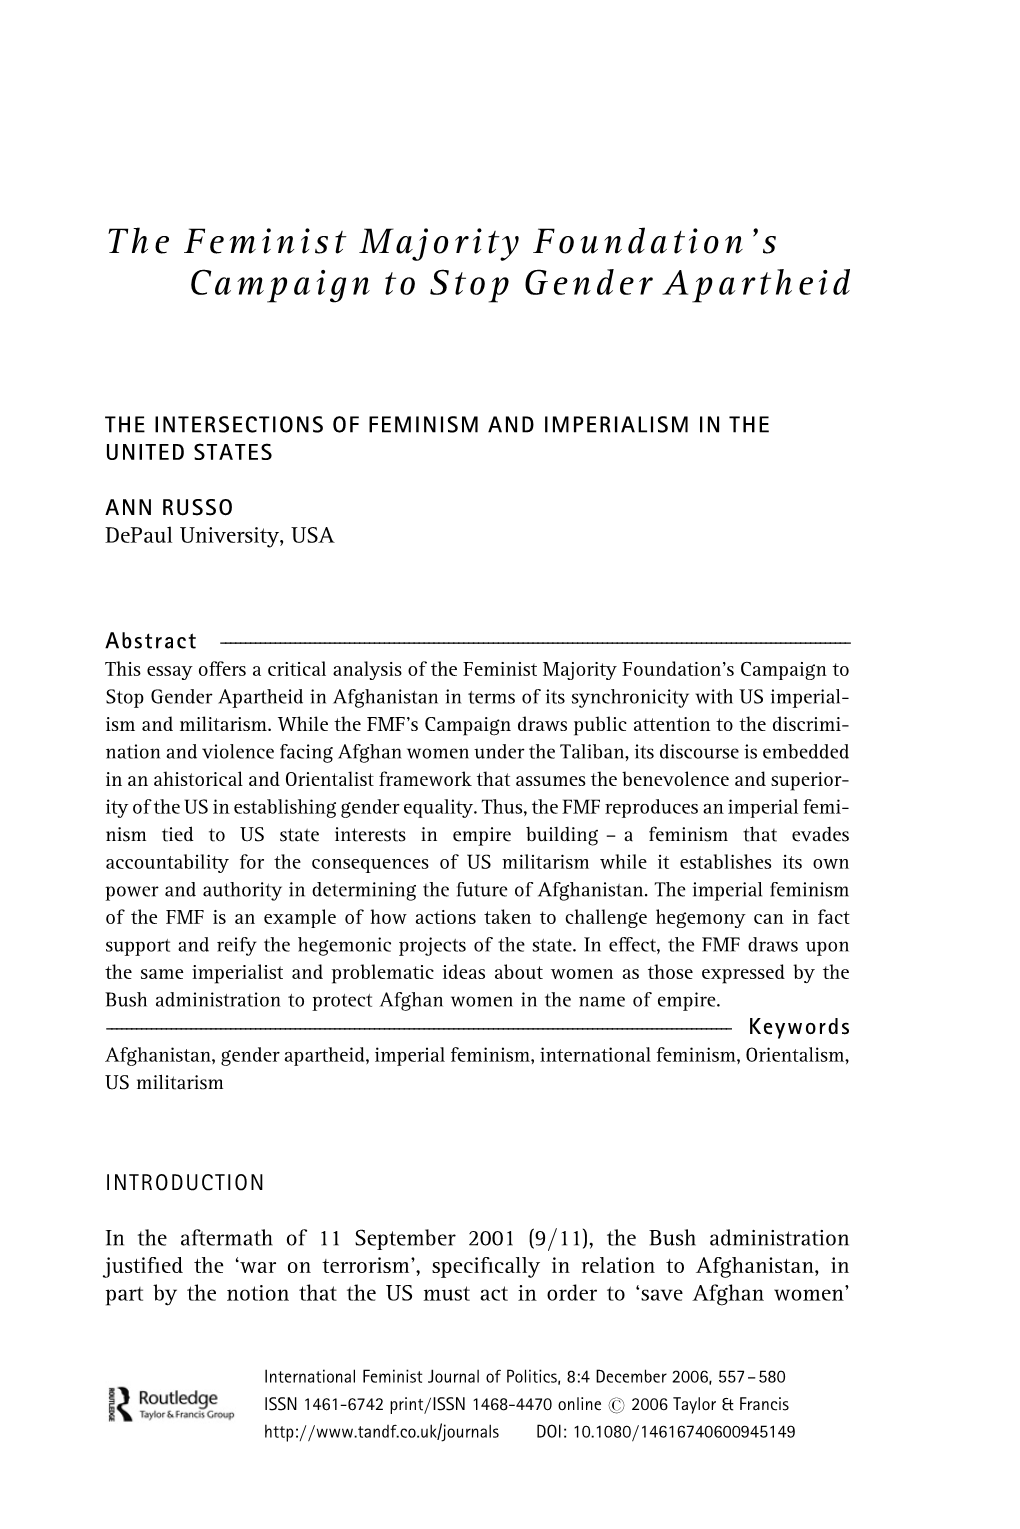 The Feminist Majority Foundation's Campaign to Stop Gender Apartheid